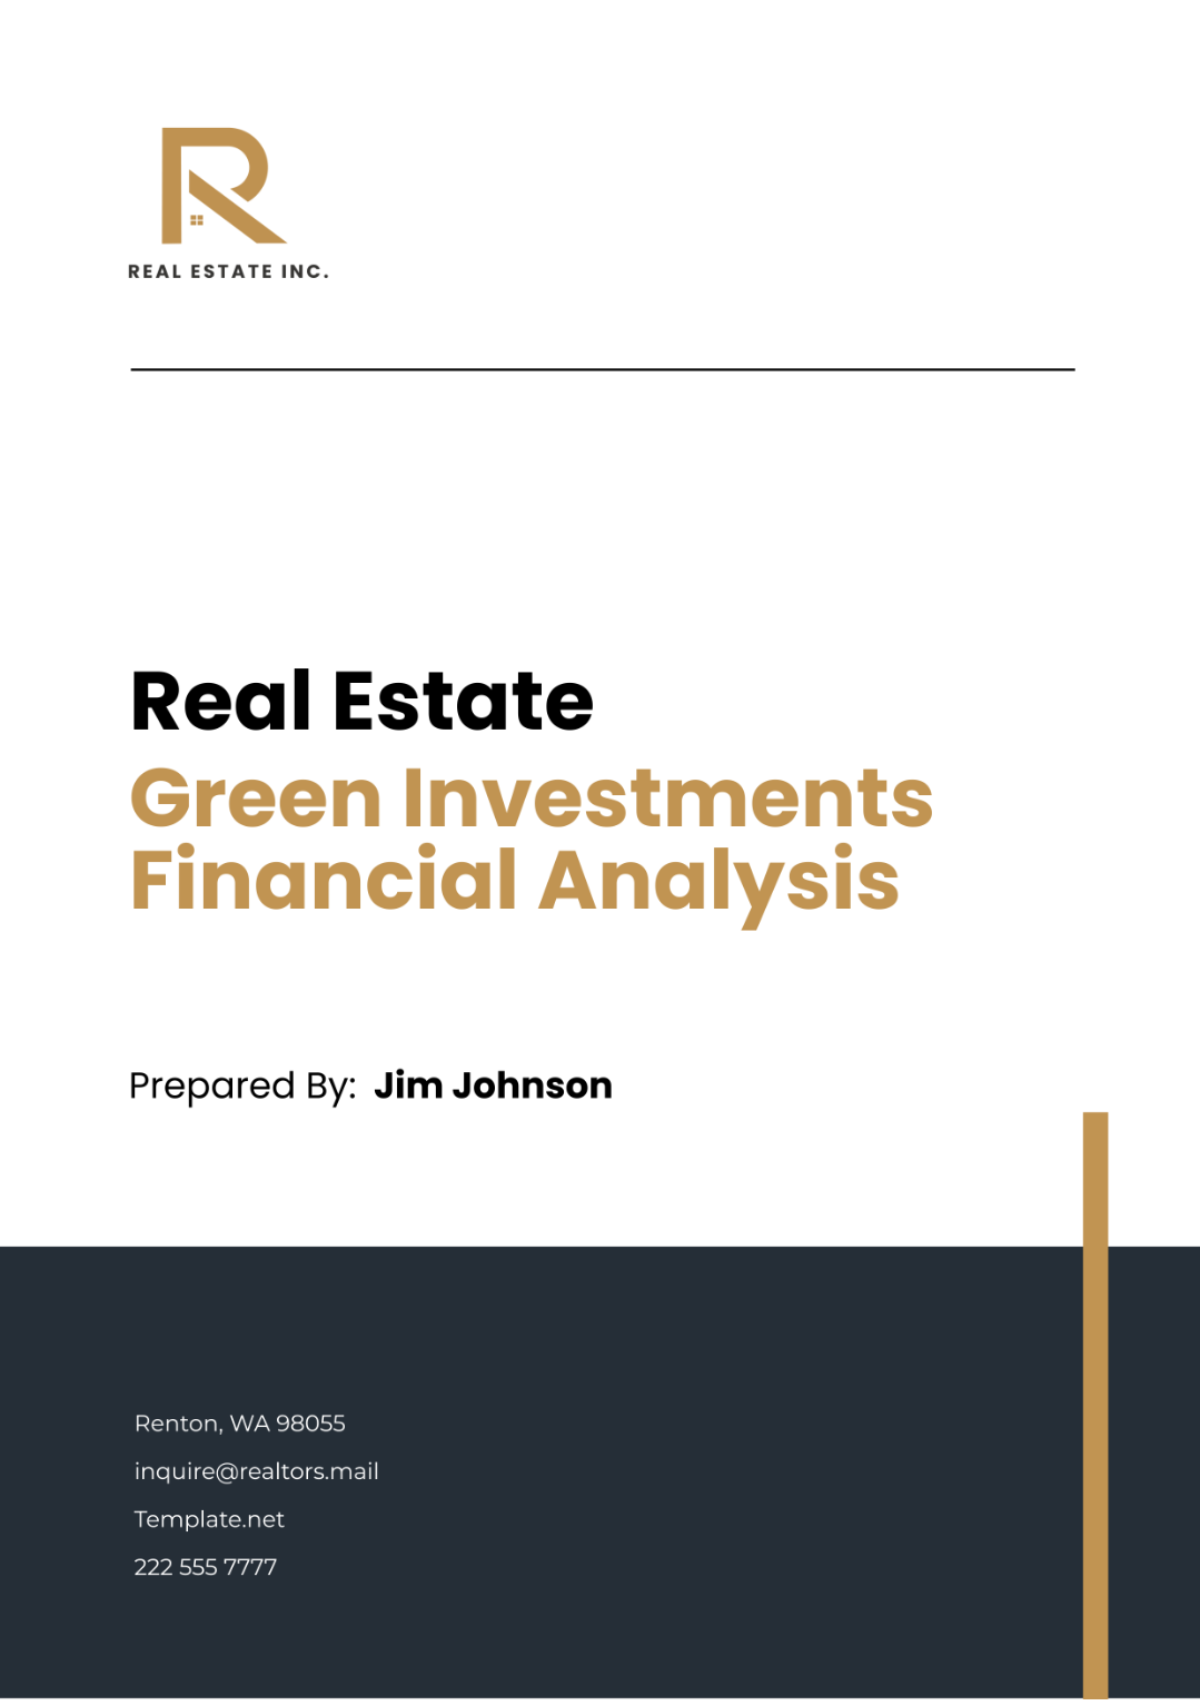 Free Real Estate Green Investments Financial Analysis Template